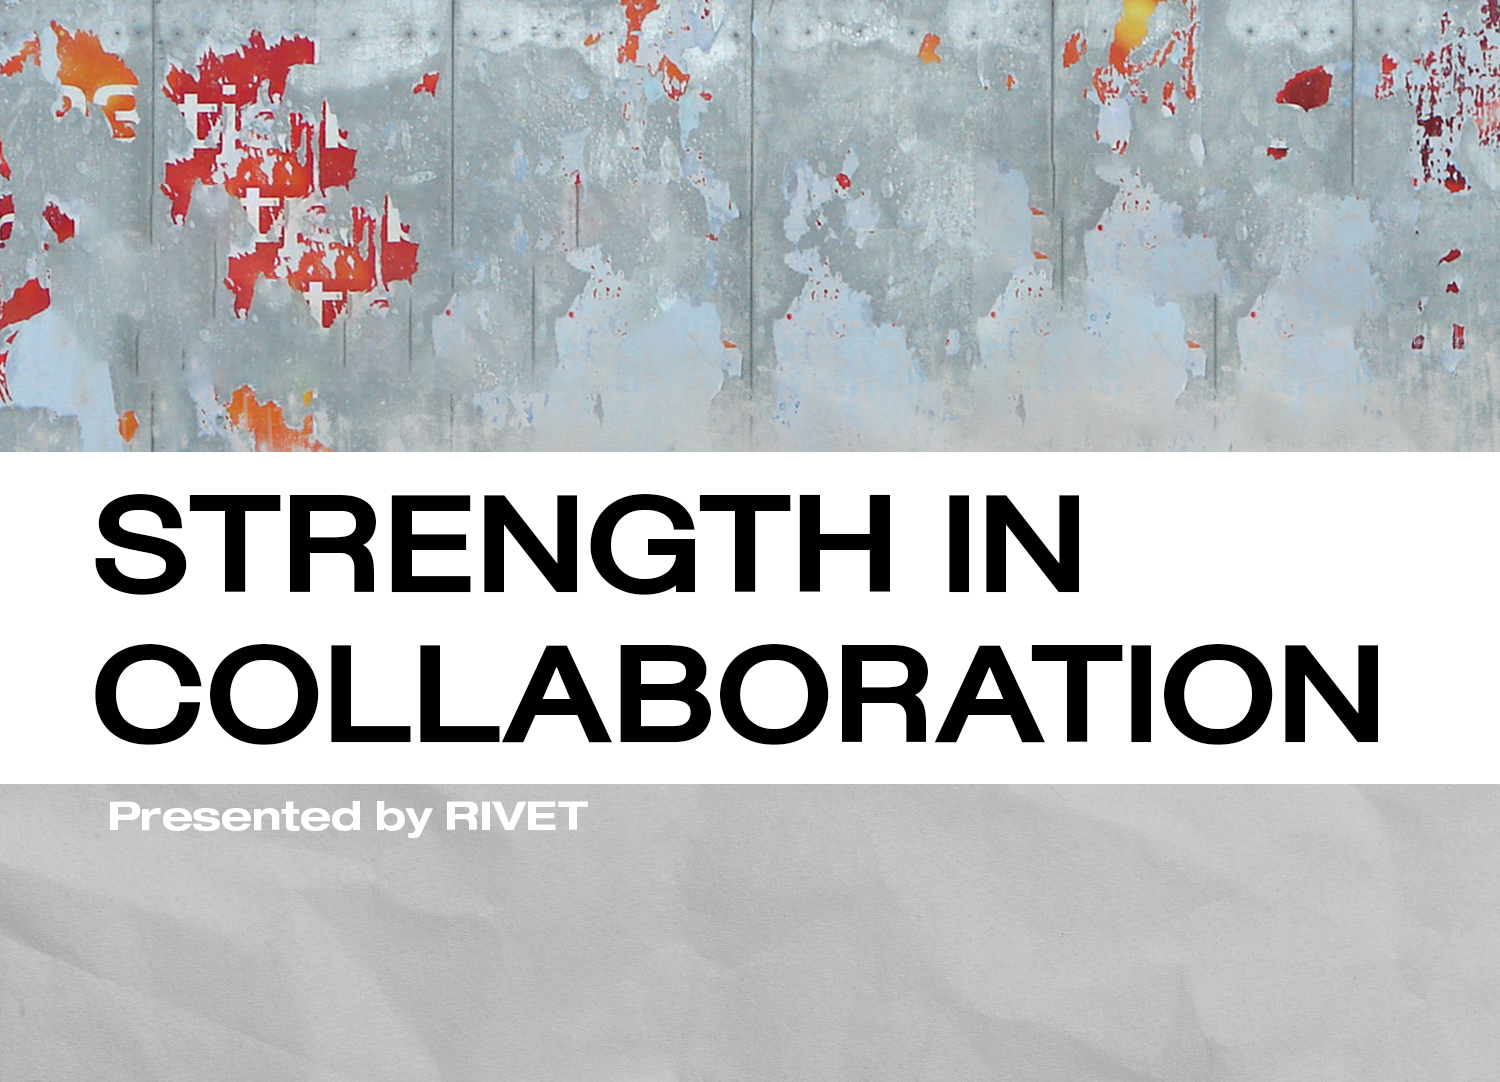 Strength in Collaboration